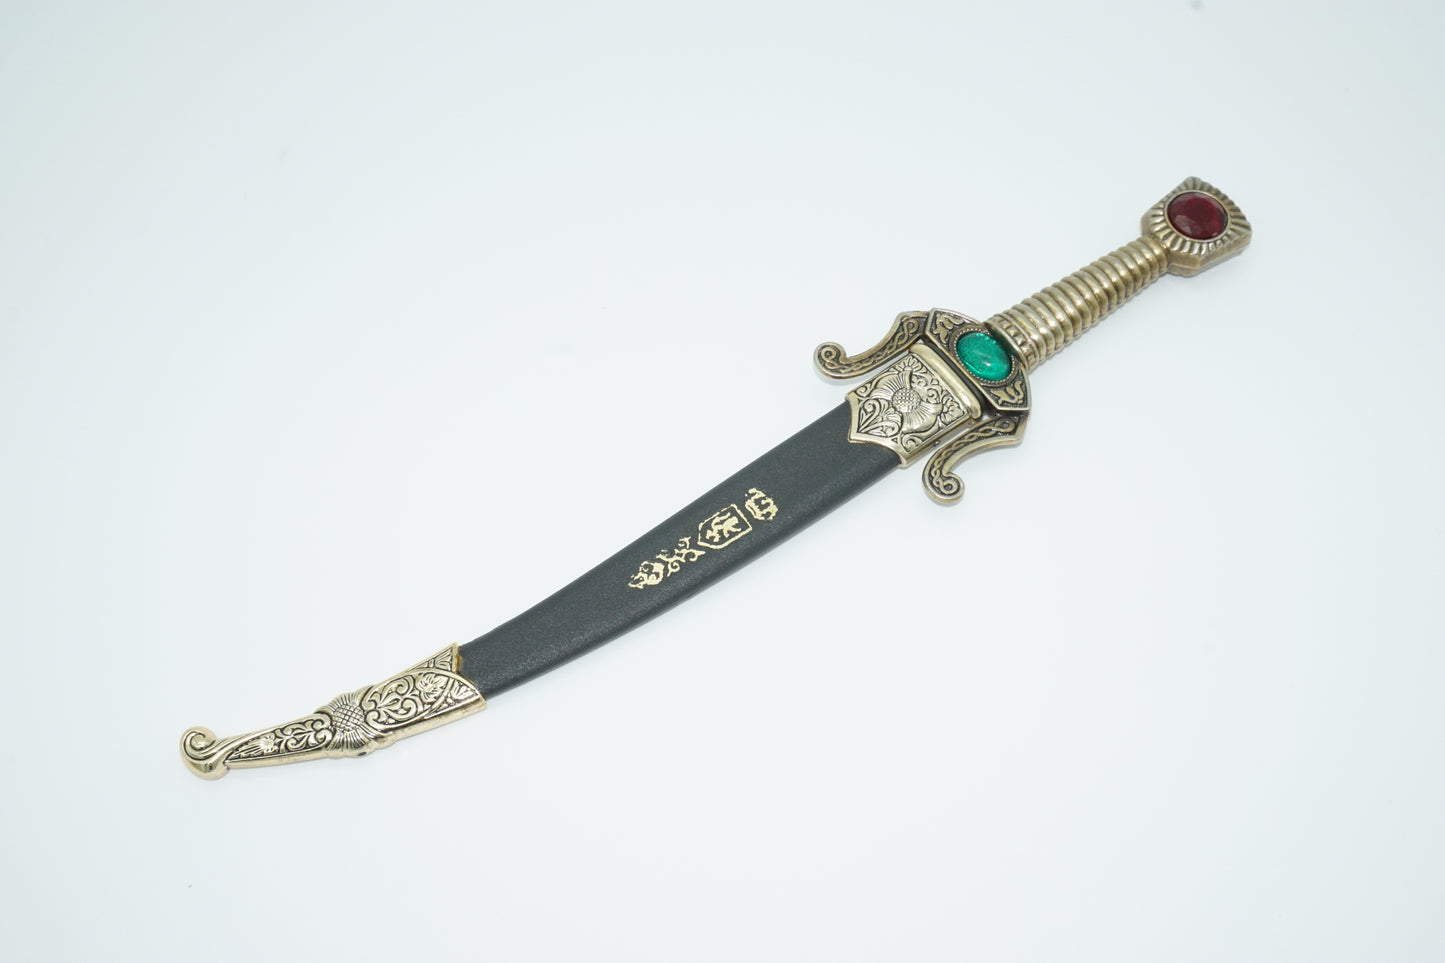 Top view of seville dagger sheathed in black sheath with decorative metal ends.